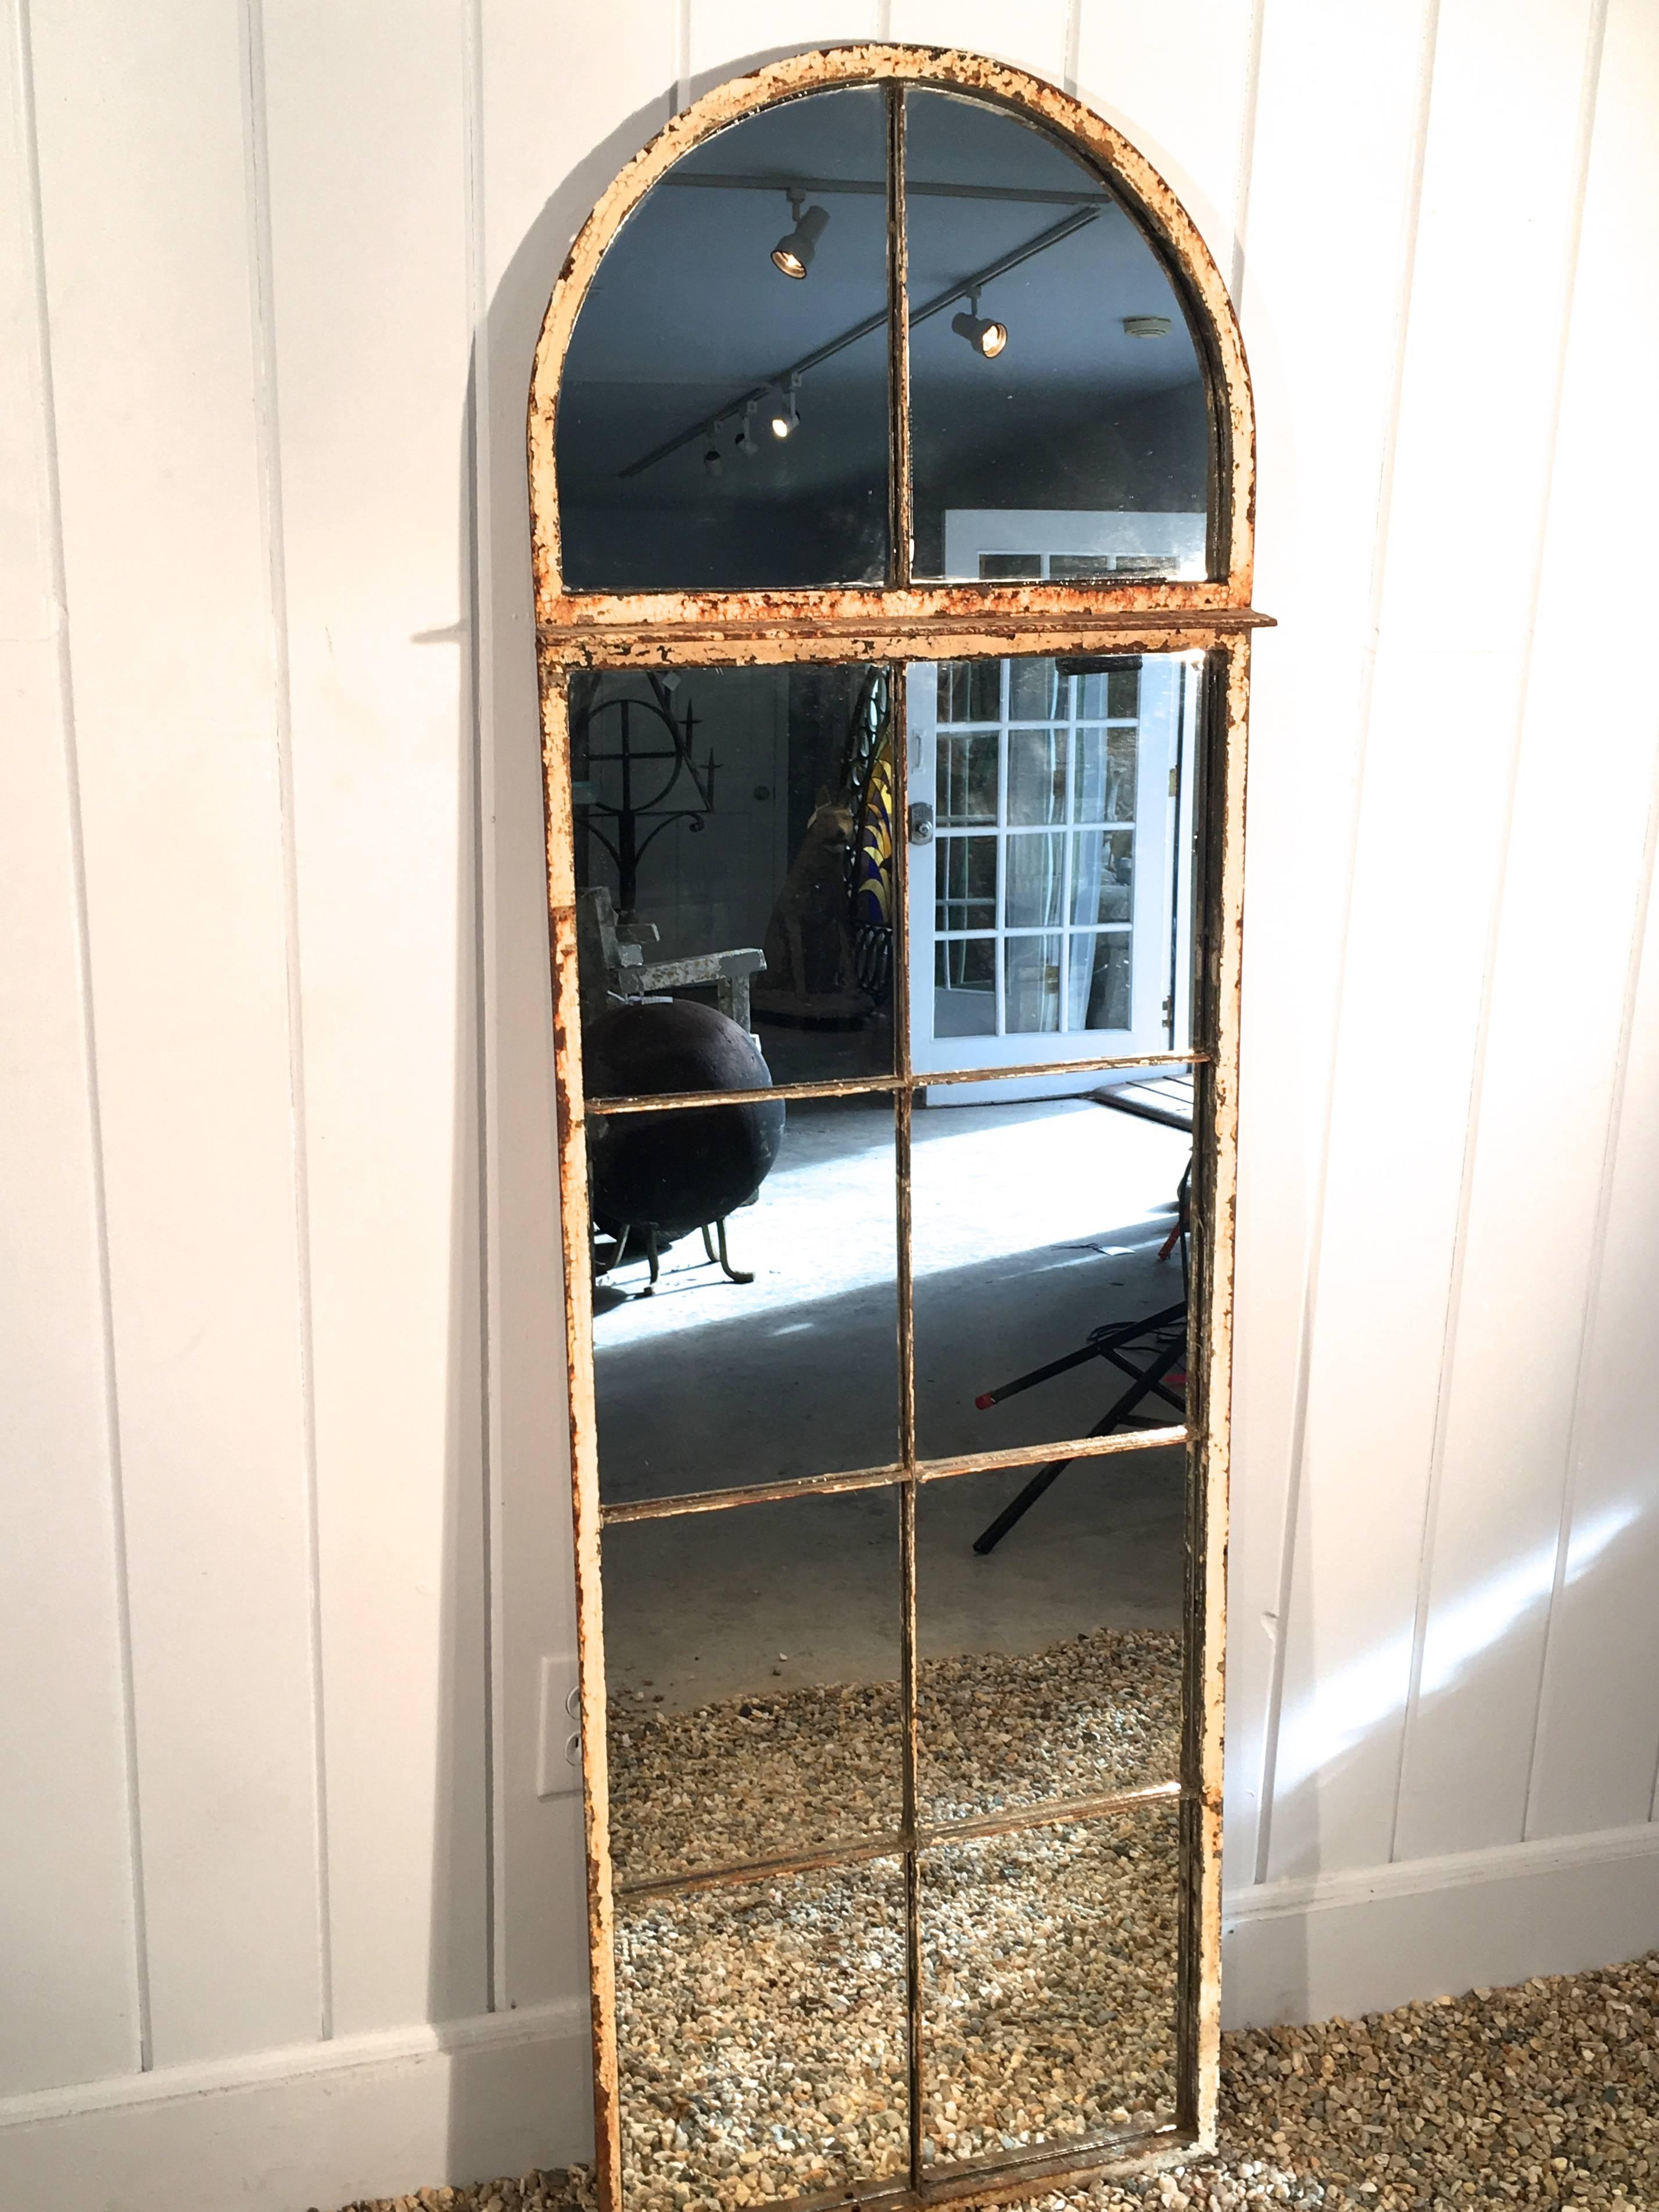 This lovely, early cast iron arched window frame has been transformed into a mirror that looks stunning above a console table, hanging in a bedroom or hallway, or in any space where an understated piece that brings light and reflection is called